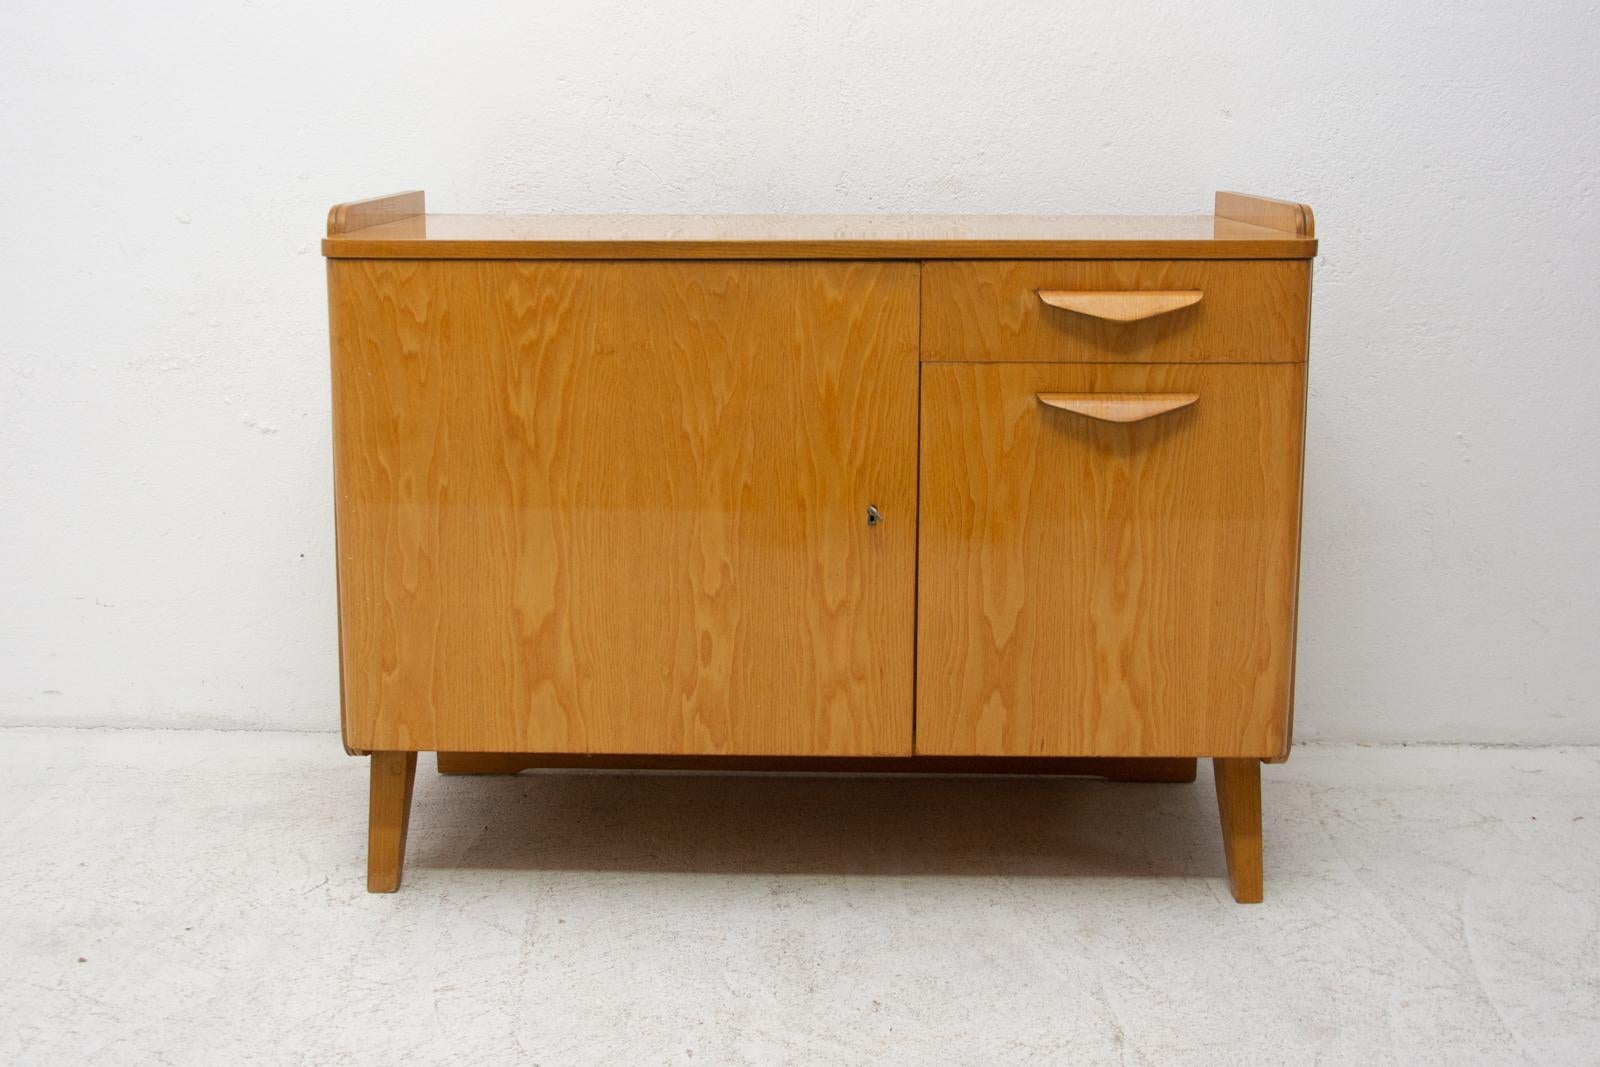 Midcentury vintage small cabinet or TV table from the 1960s. It was designed by František Jirák and was manufactured by Tatra nábytok Company in the former Czechoslovakia. In very good condition. Ashwood veneer, plywood.